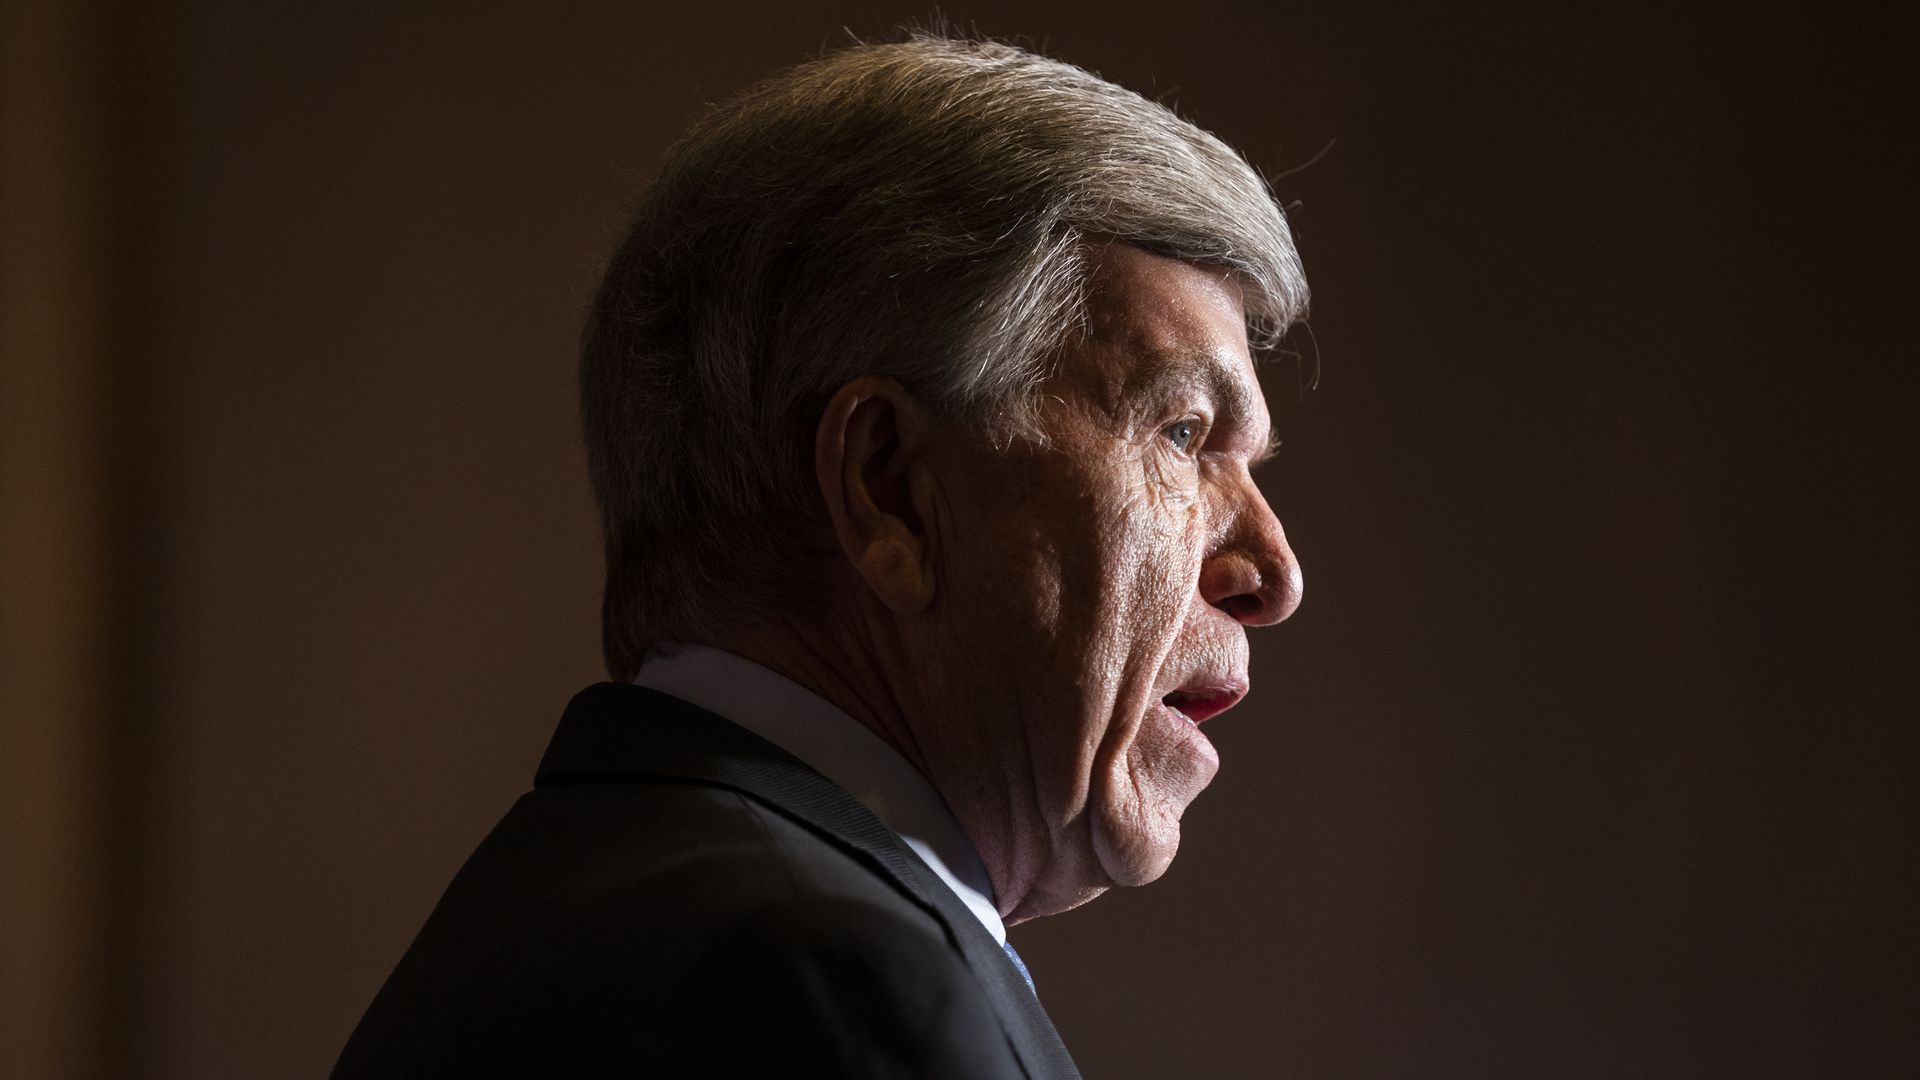 Sen. Roy Blunt is seen speaking during a news conference.